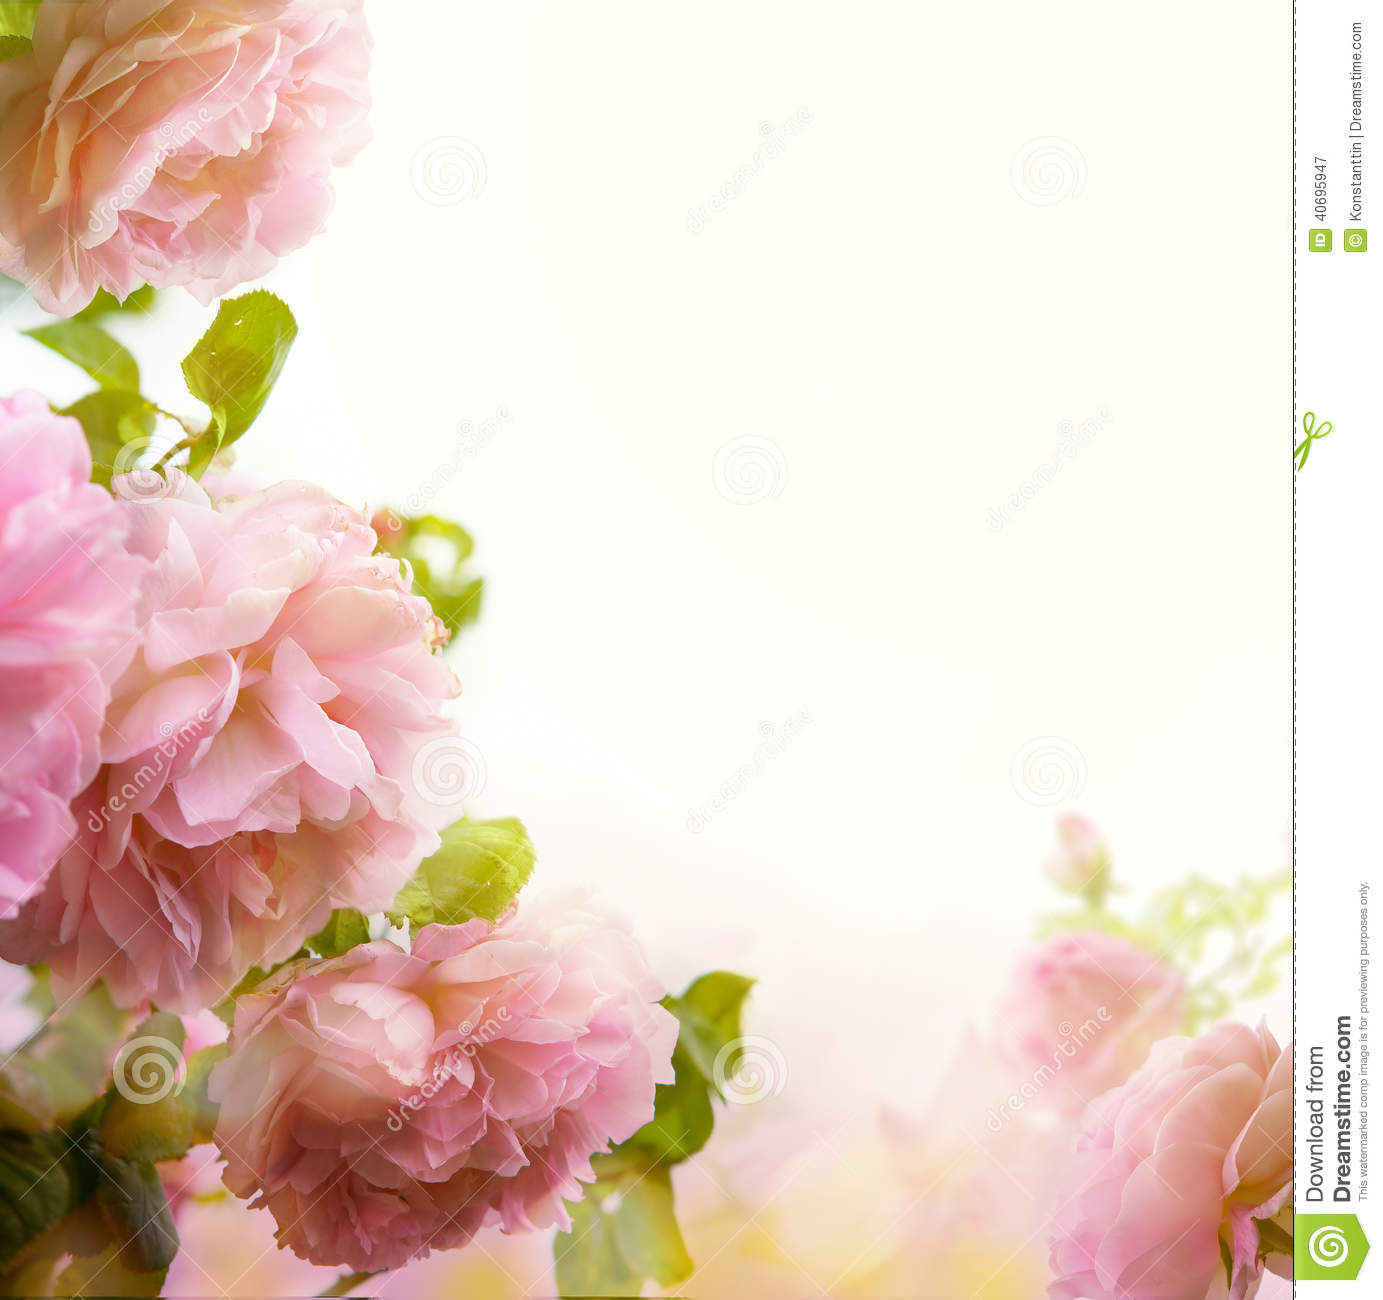 Image Pink Rose Flower Border Pc Android iPhone And iPad Wallpaper